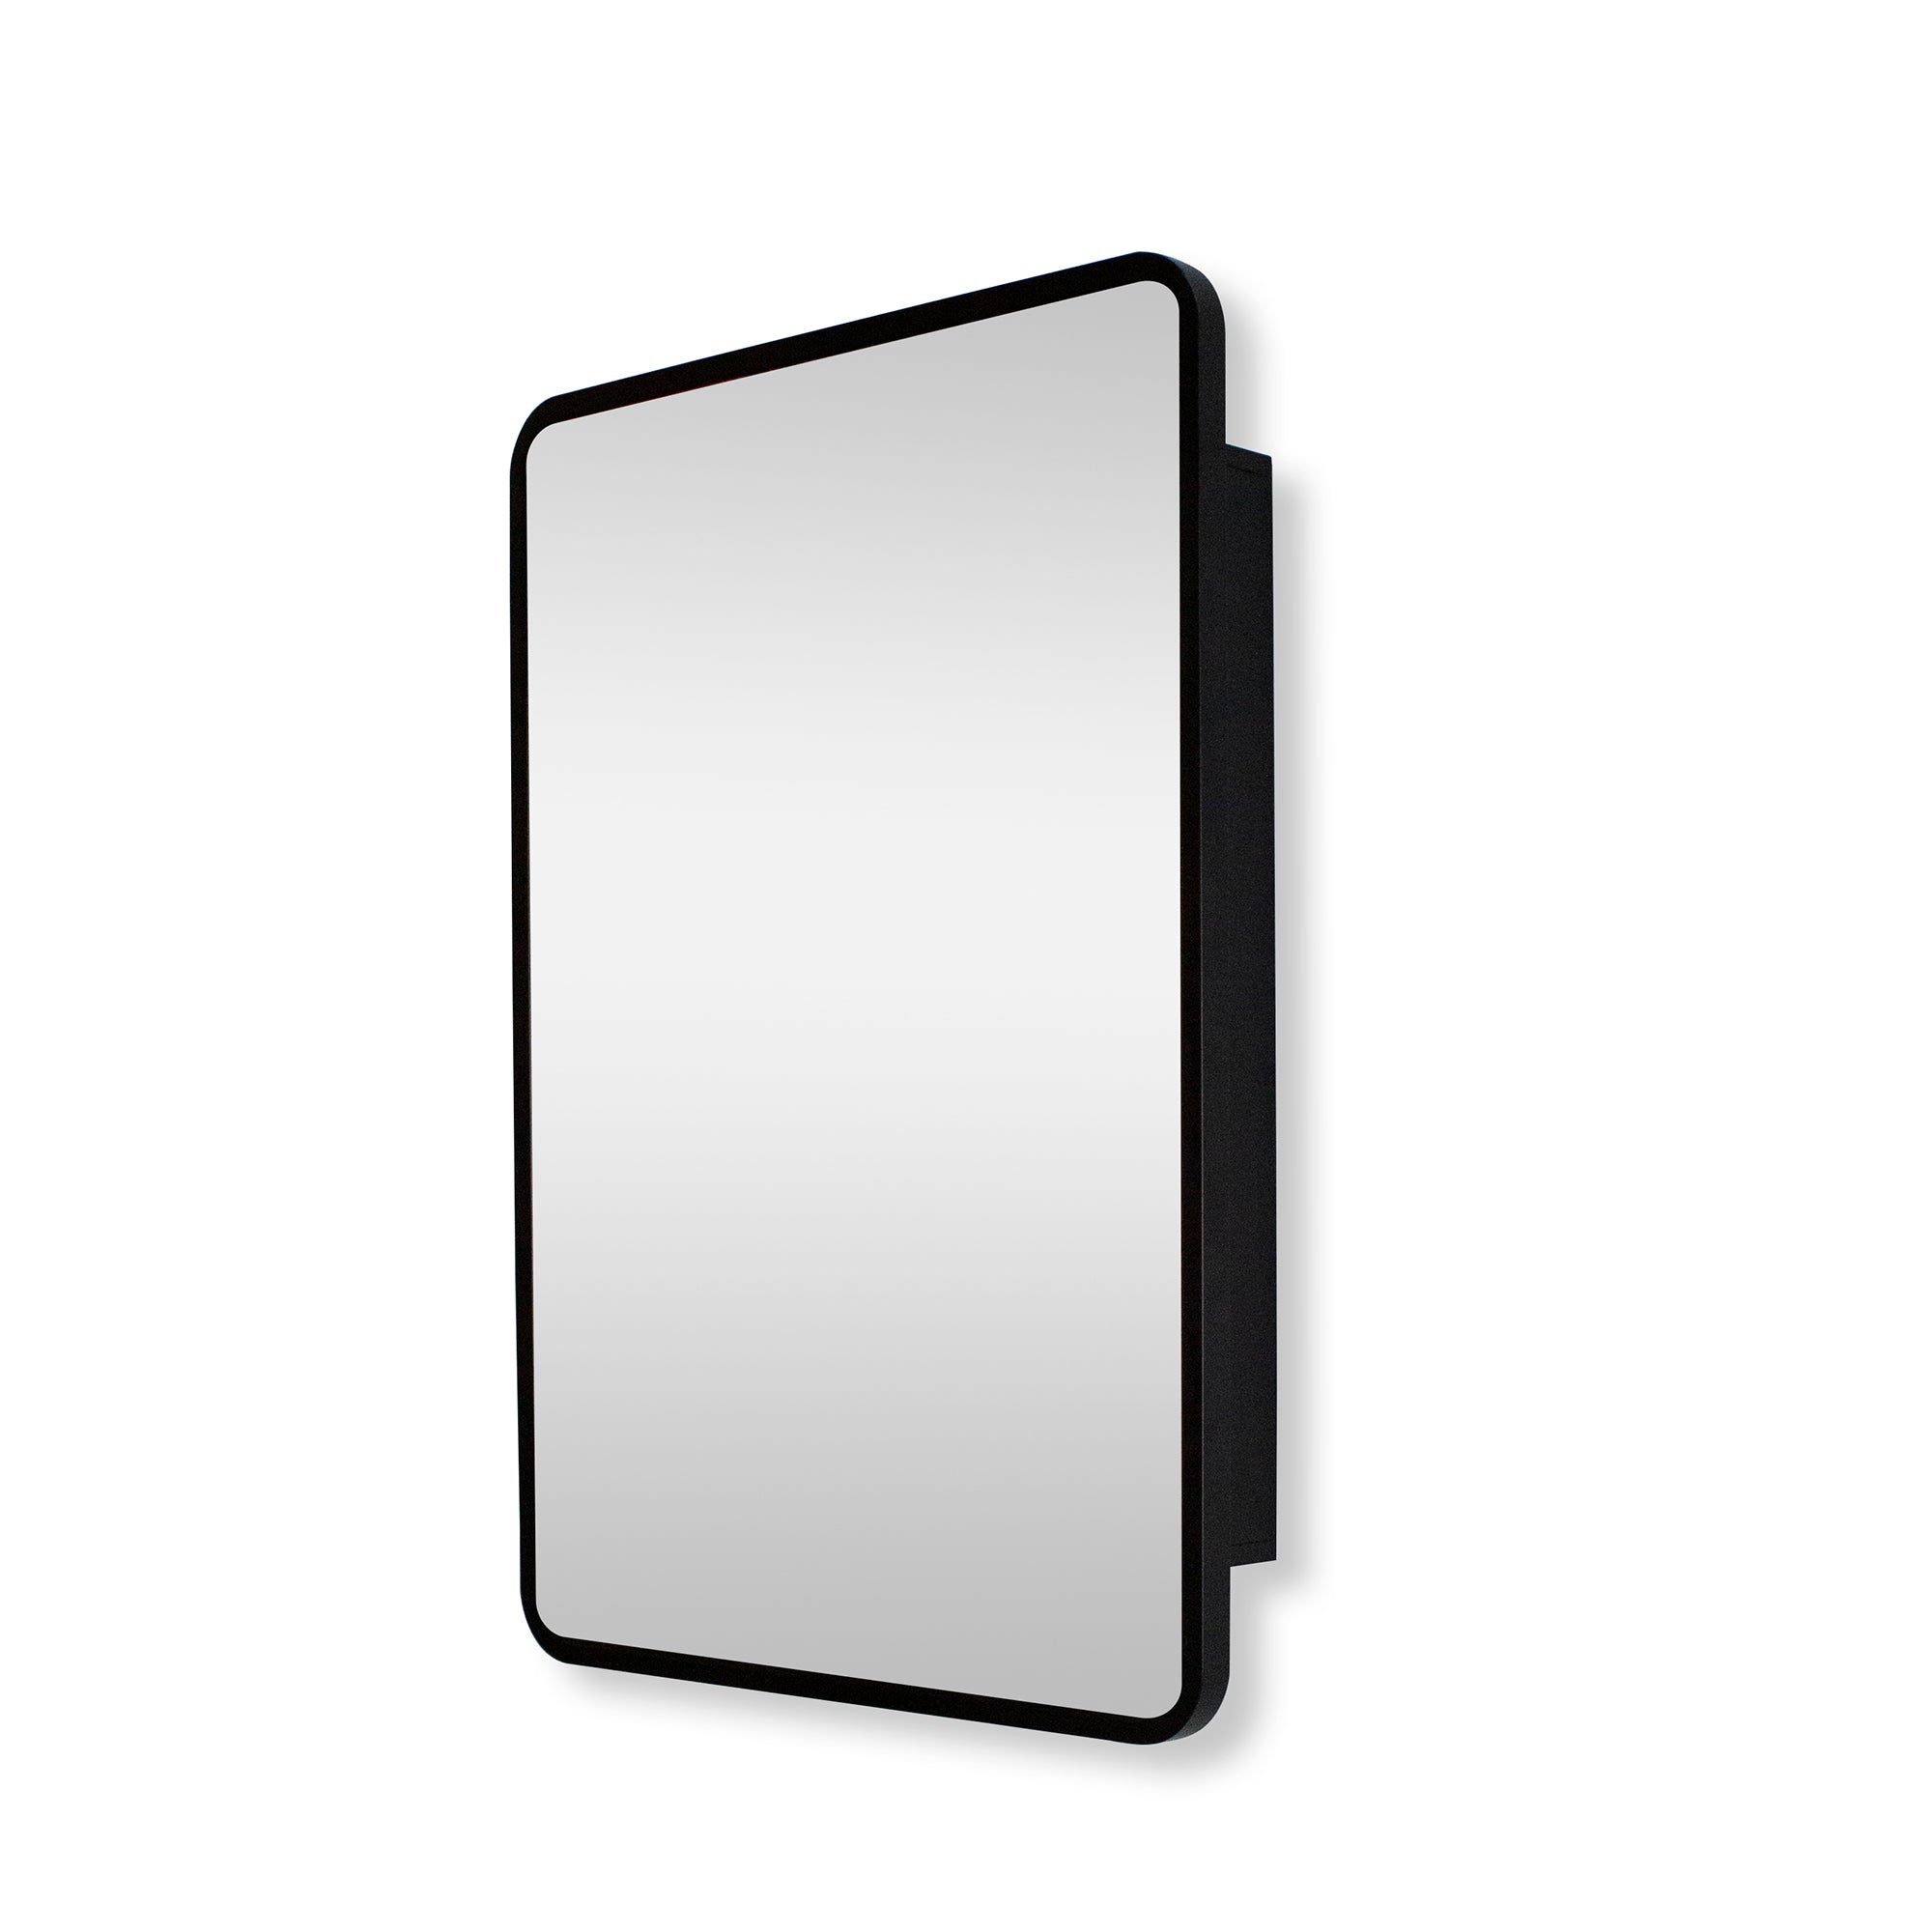 Surface or Recessed Mount 1 Door Framed Mirrored Medicine Cabinet with Shelves